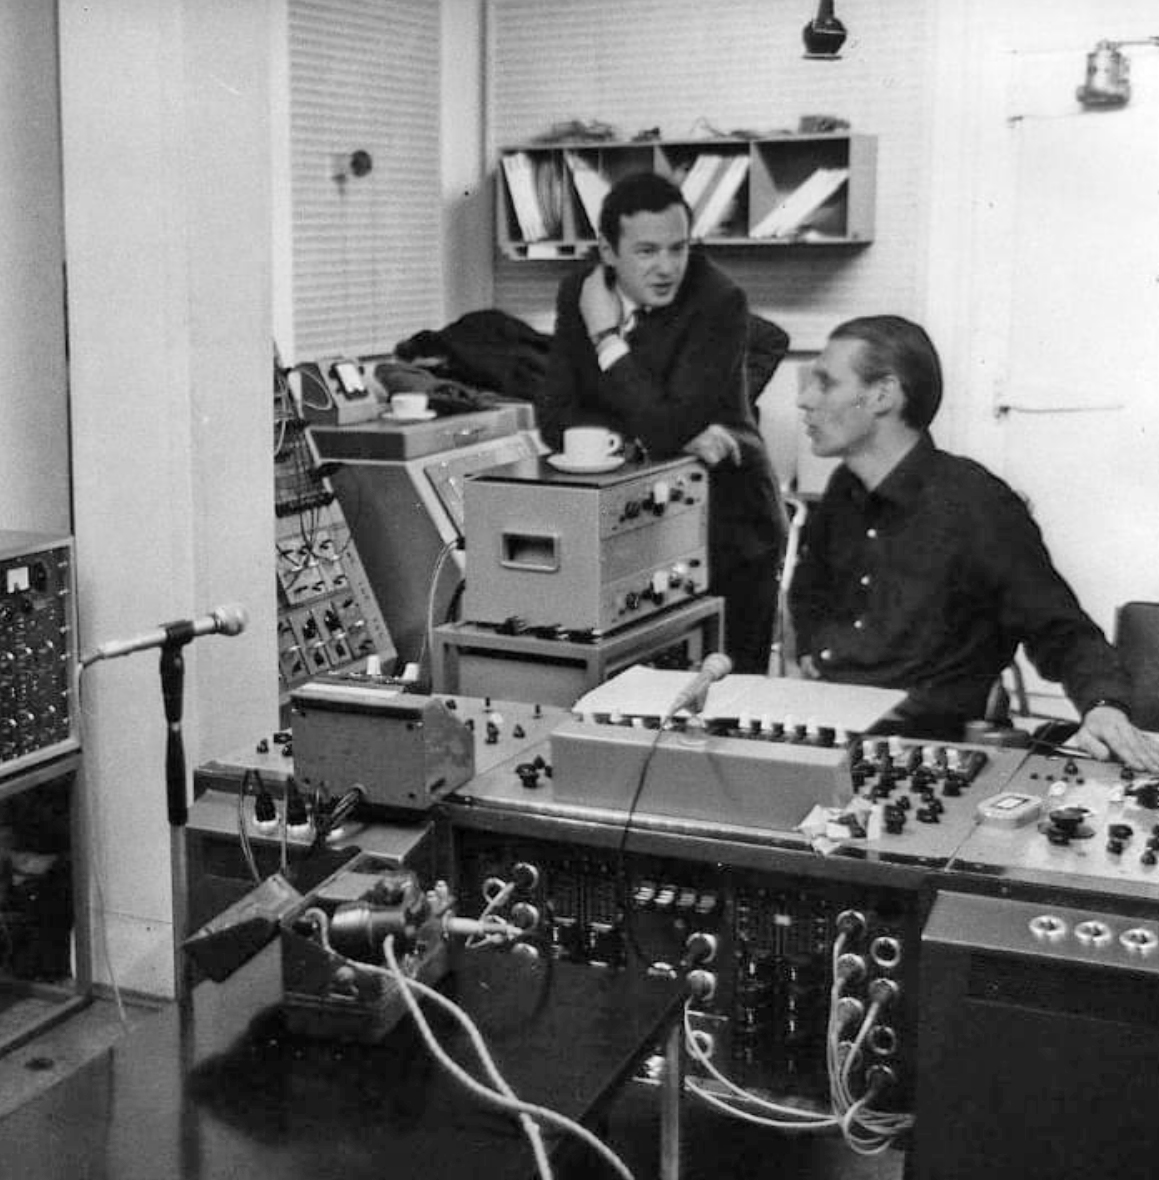 Brian Epstein and George Martin with BTR reel tape recorders